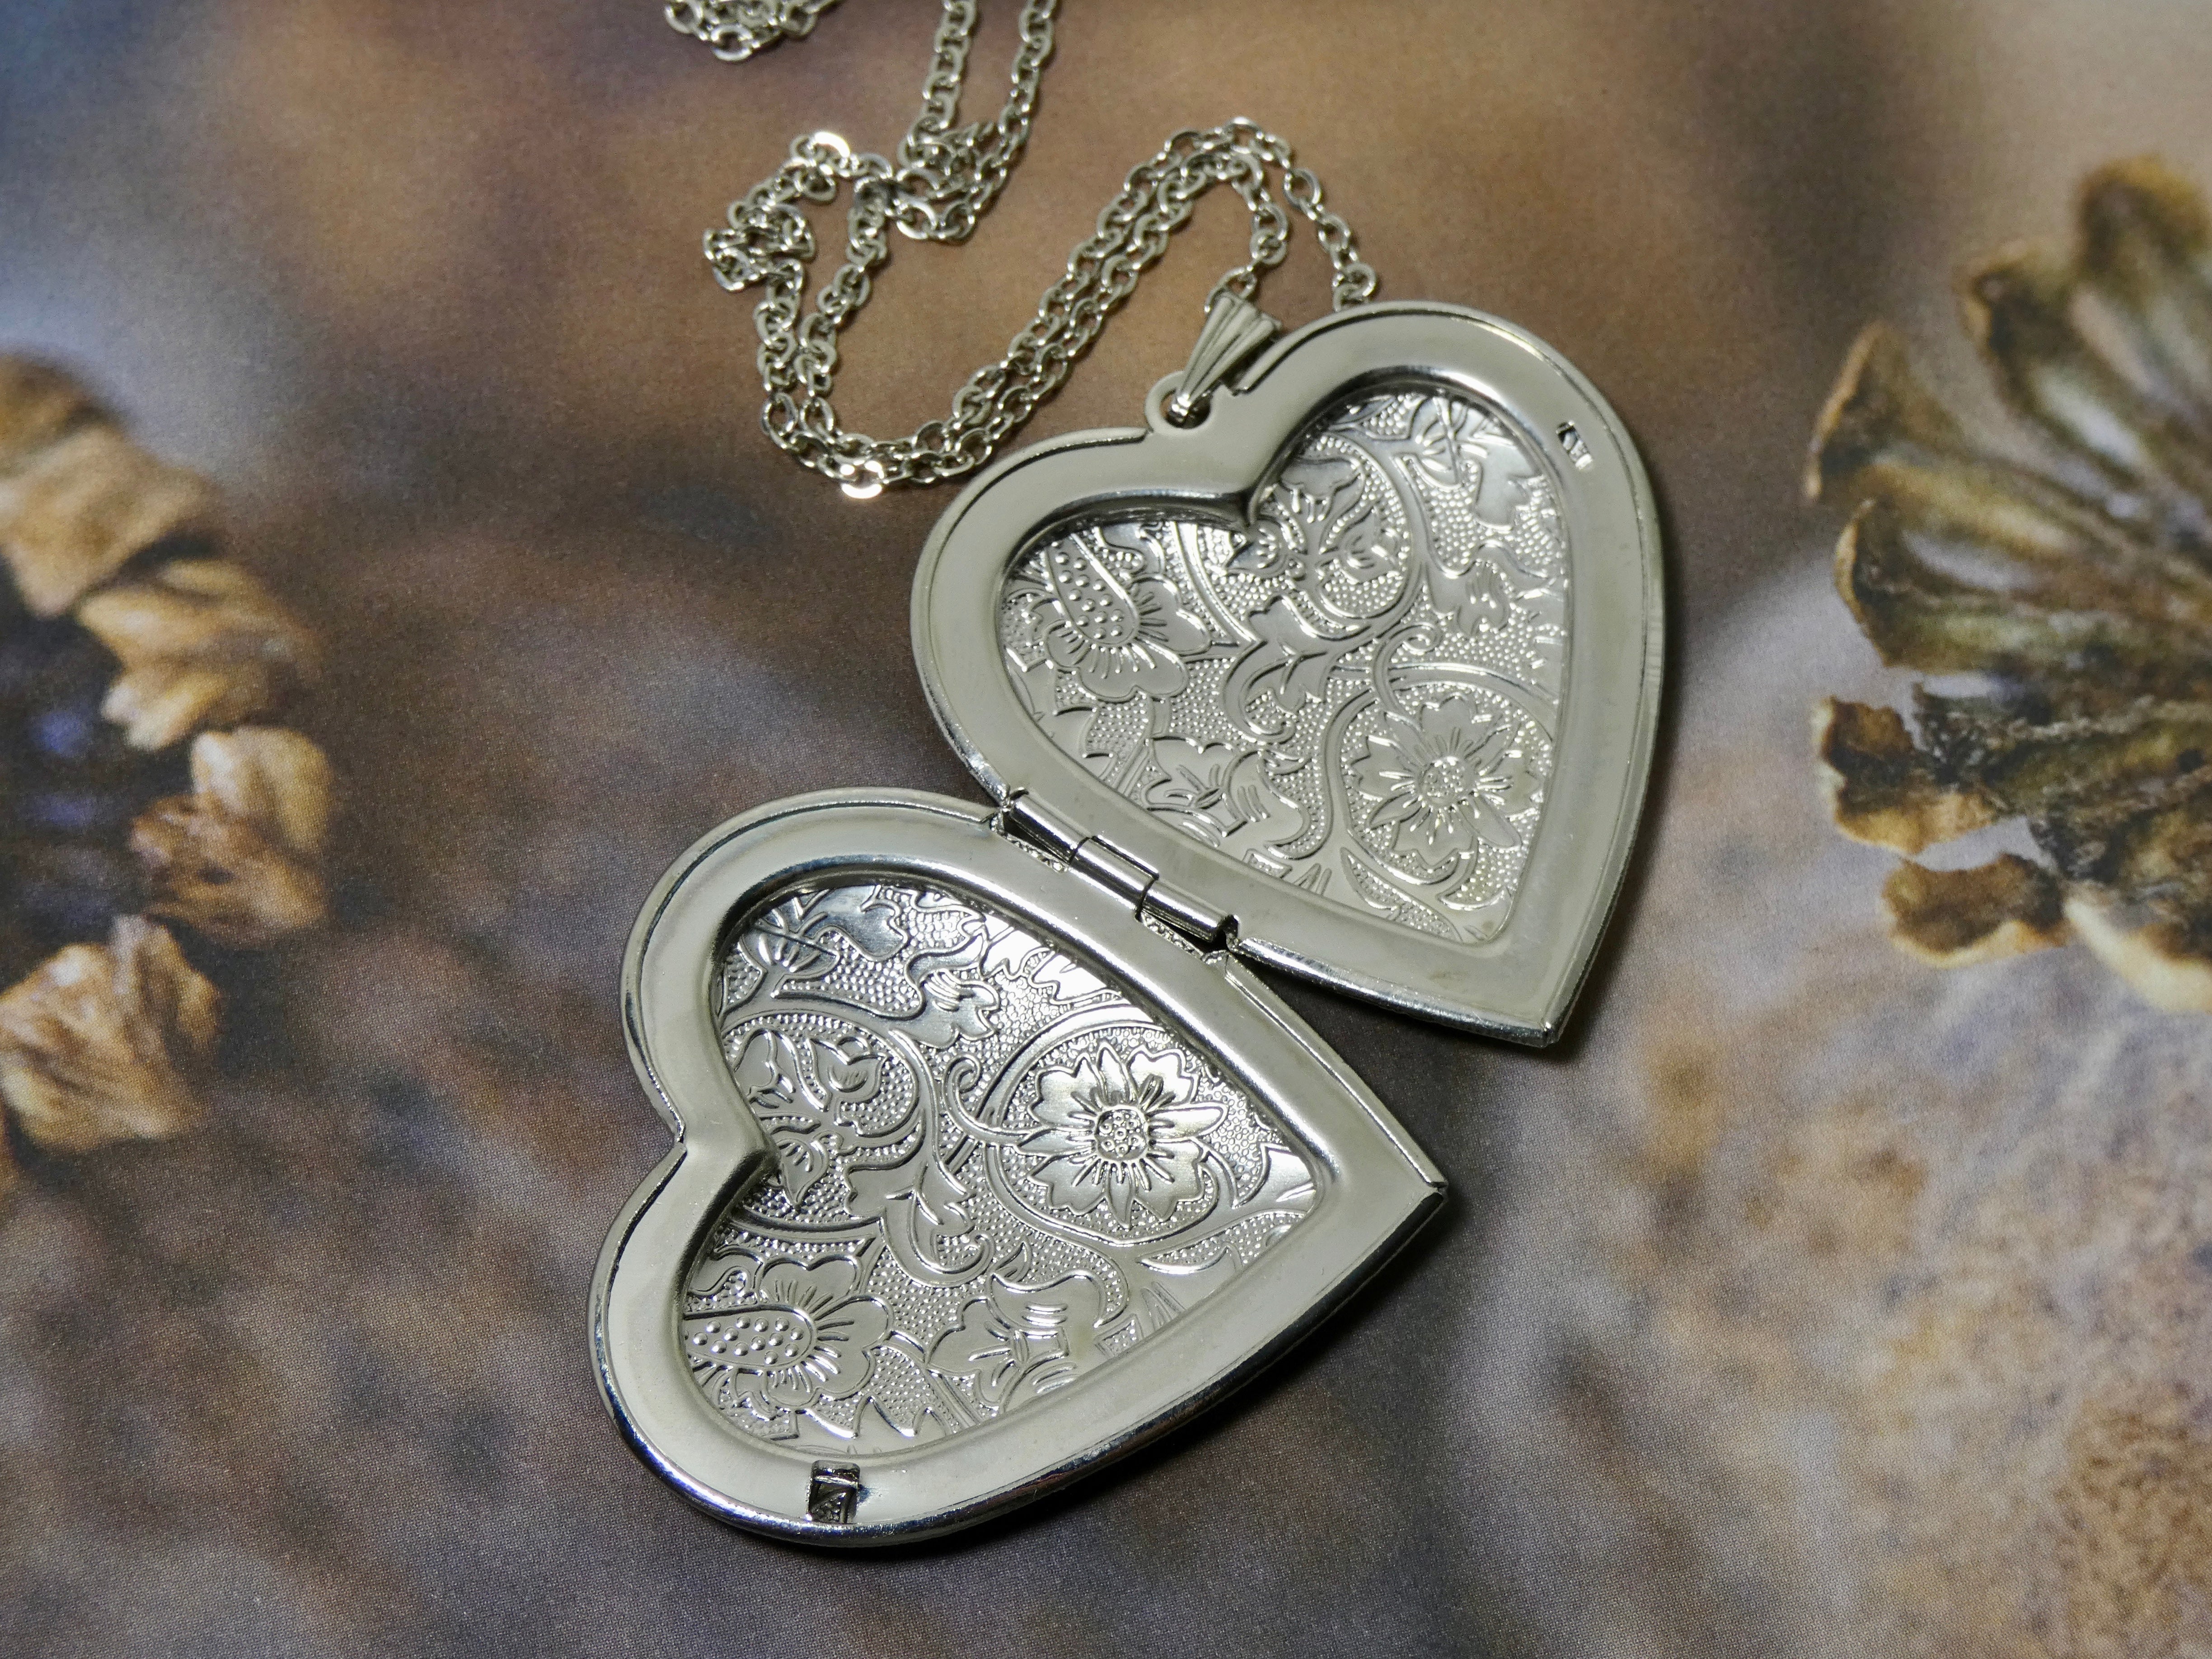 U7 Jewelry Heart Locket Necklace Engraved Picture Locket Necklaces